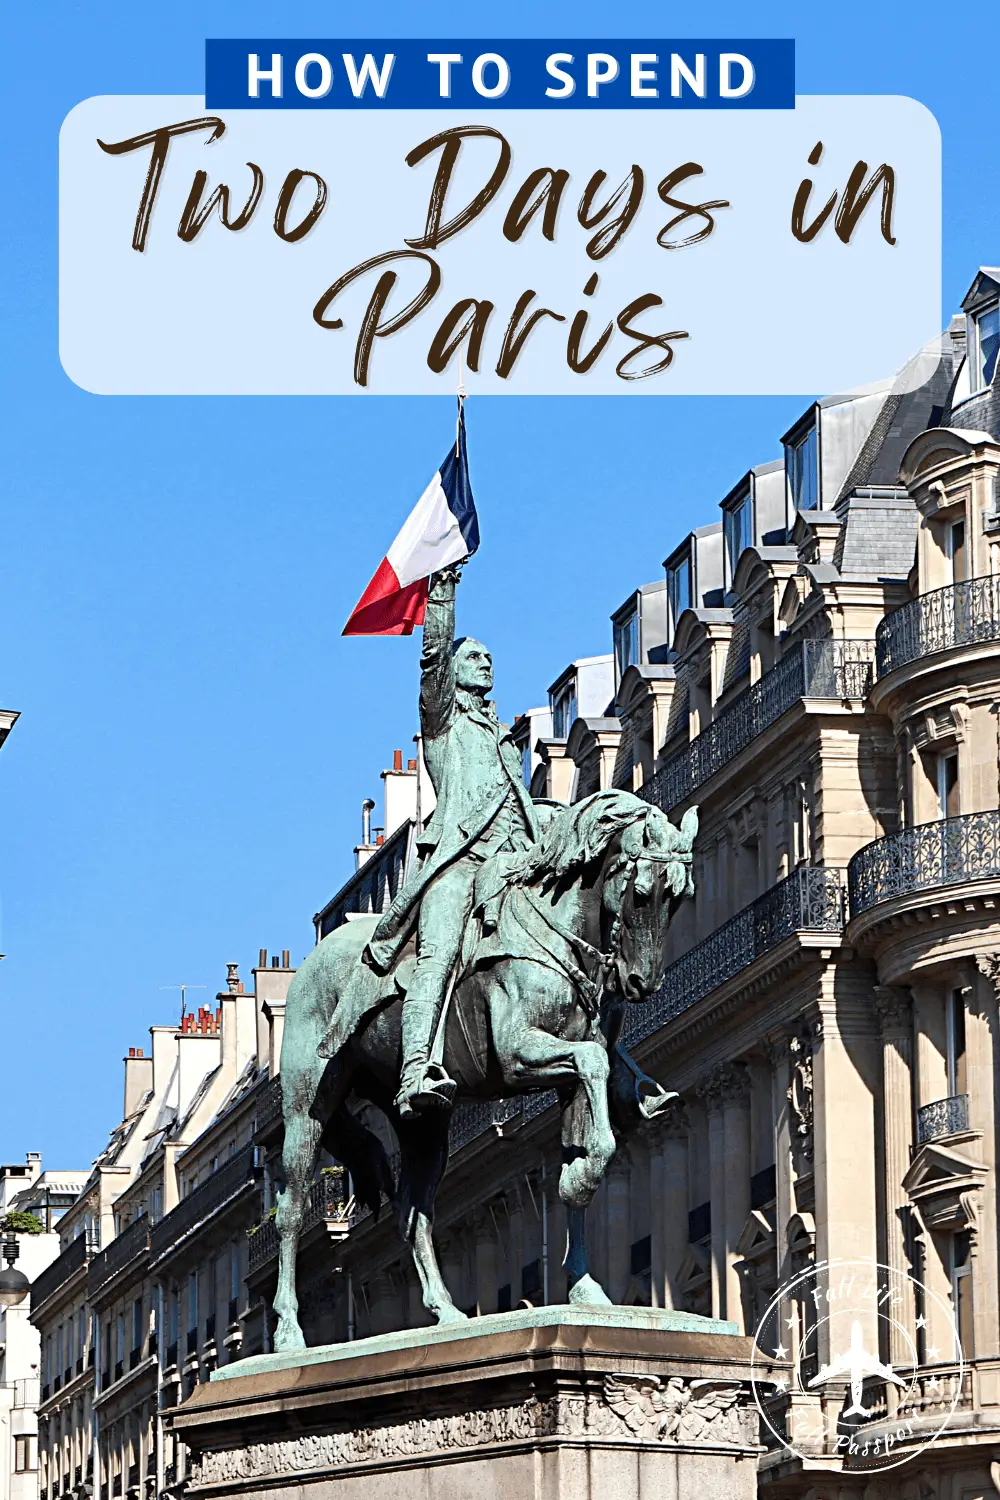 How to Spend Two Days in Paris